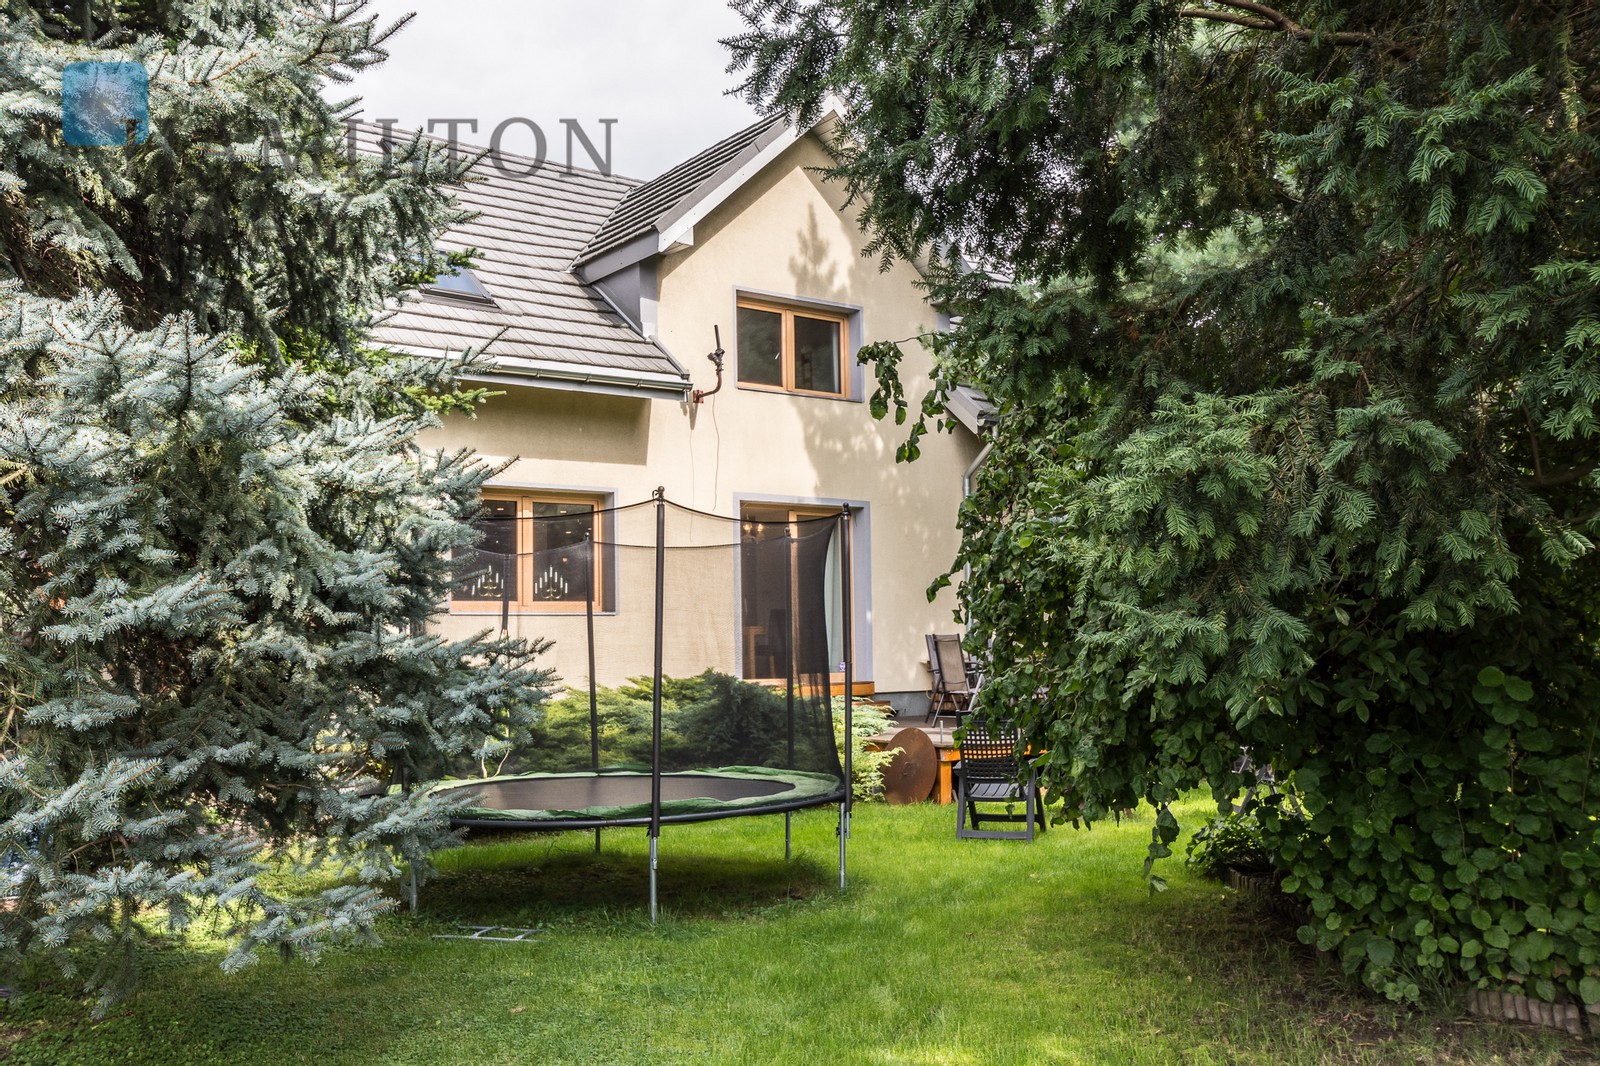 A spacious house with a large garden in the Olsza neighborhood Krakow for rent